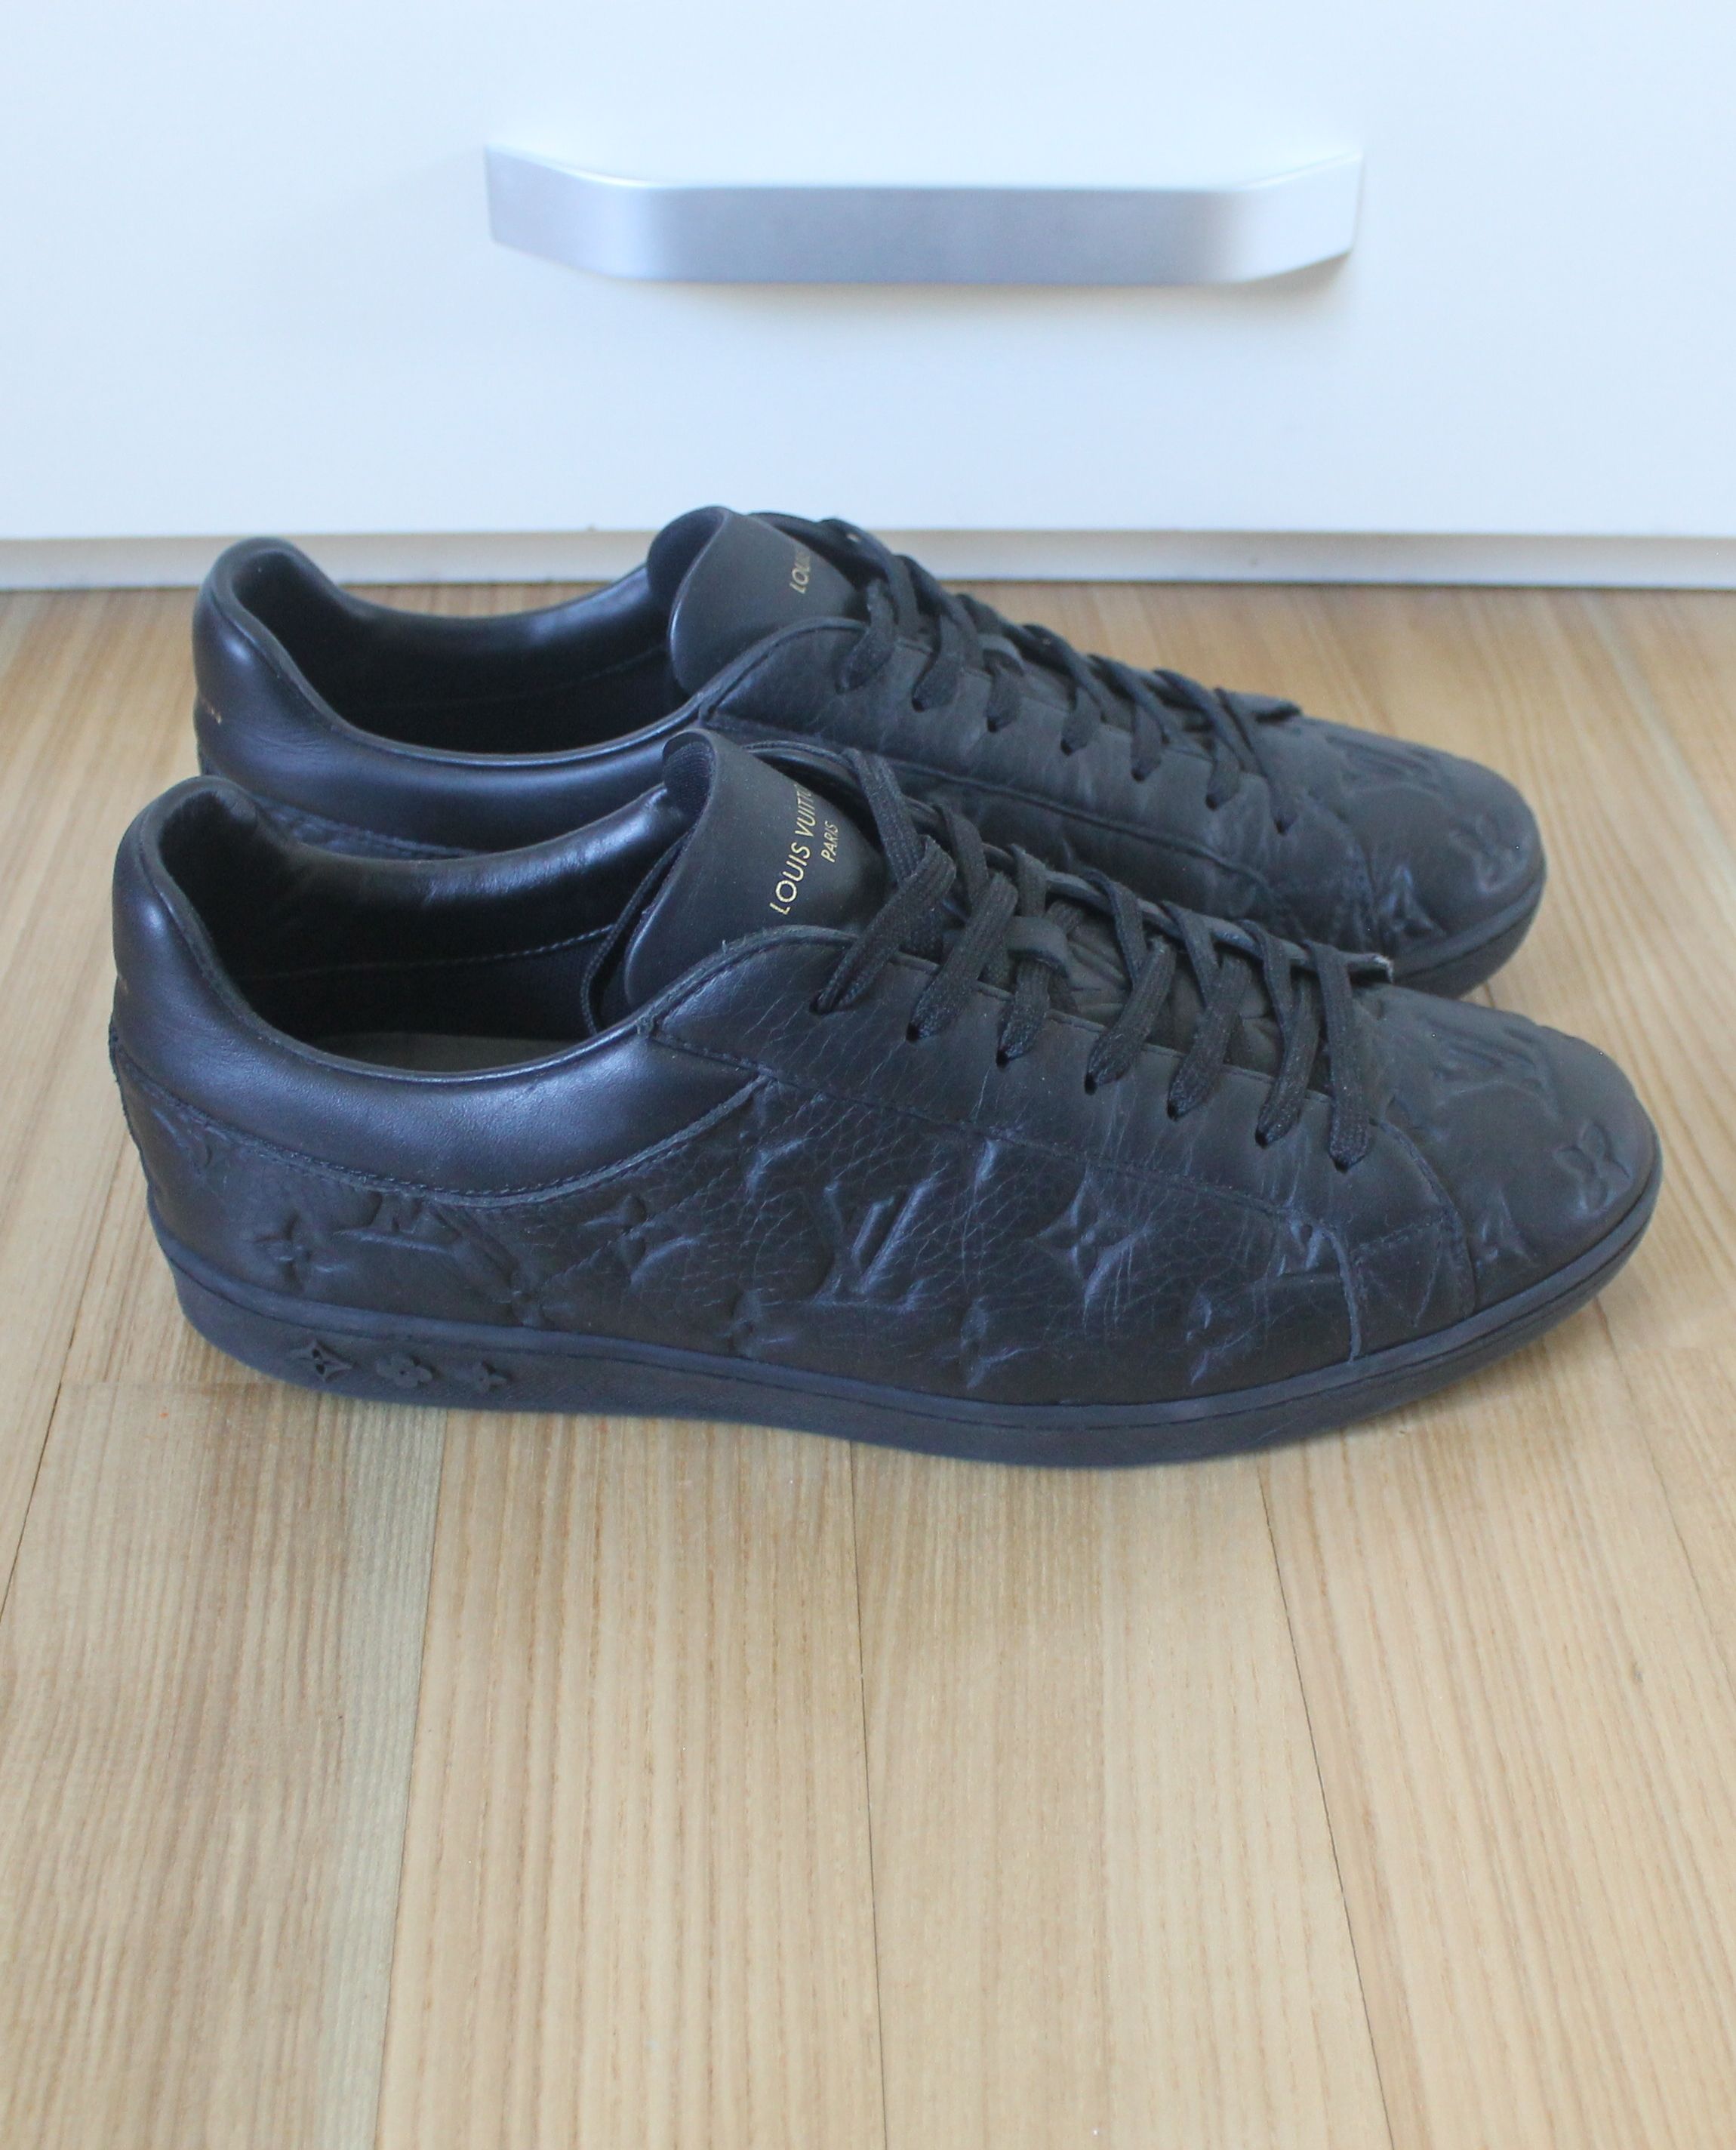 Louis Vuitton Black Leather Luxembourg Sneakers Size 42 Louis